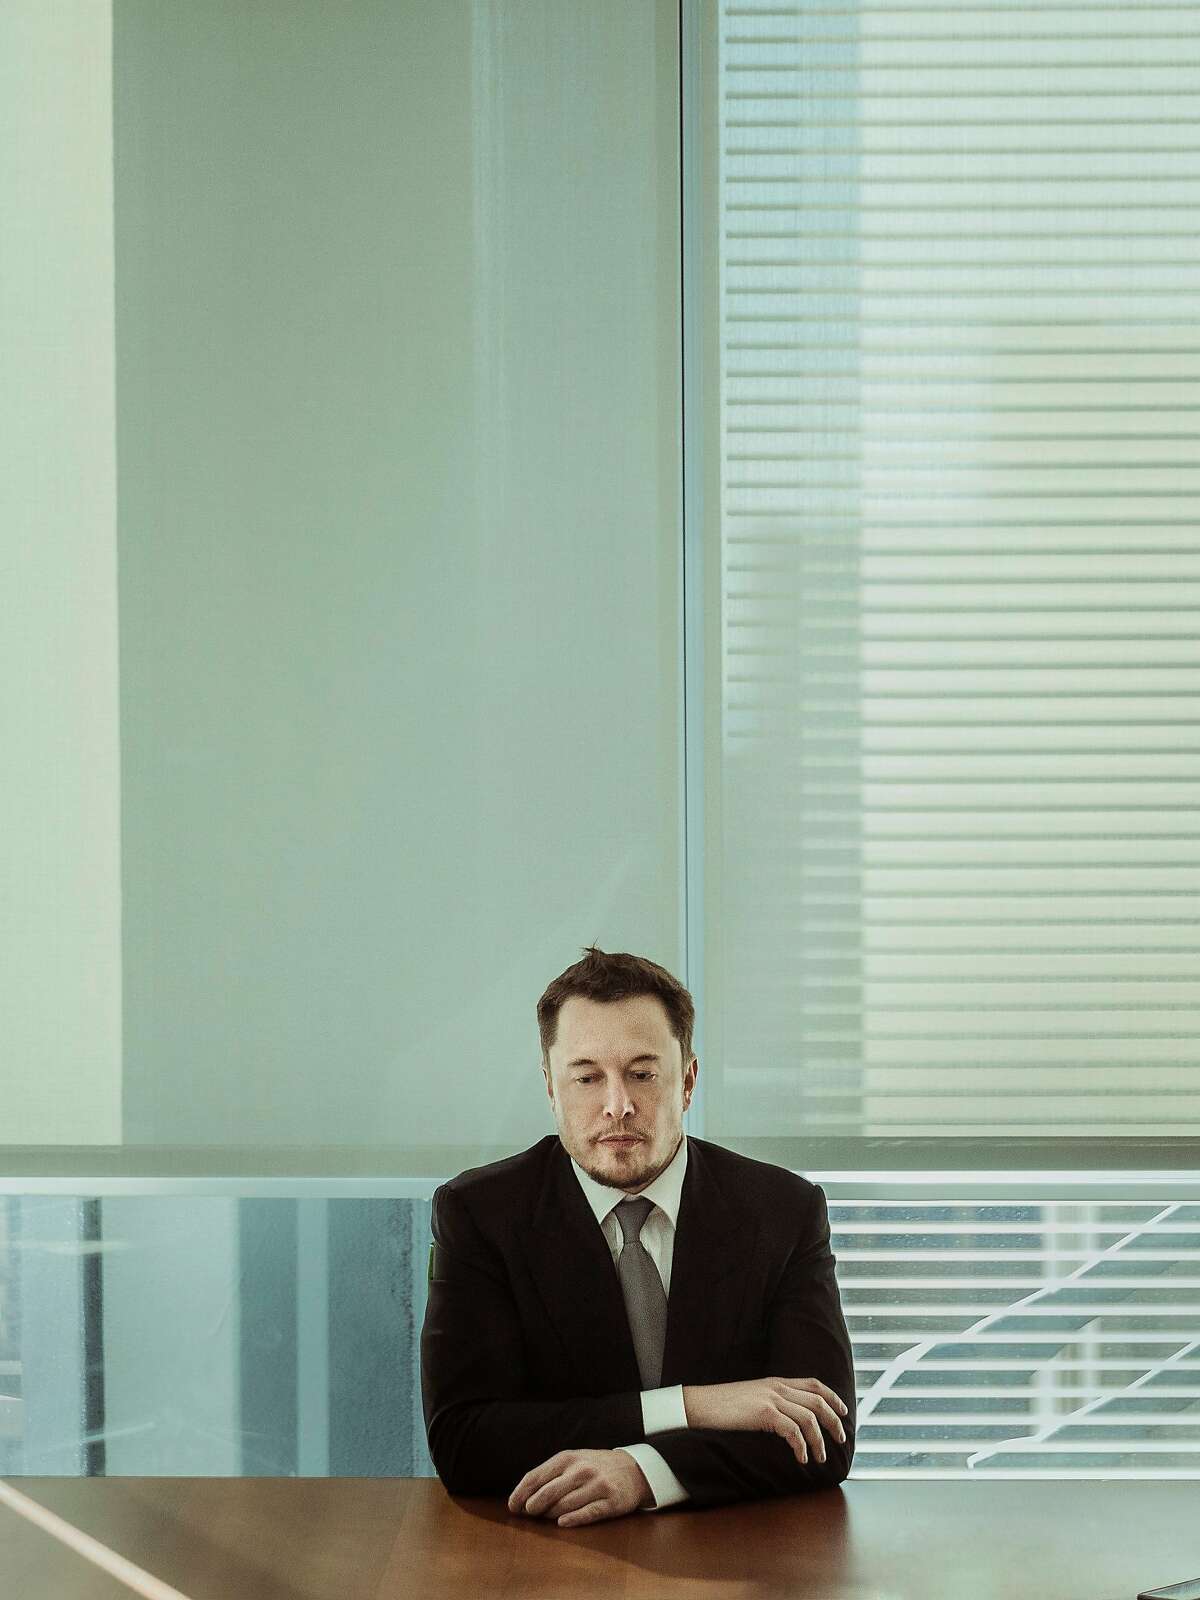 FILE -- Elon Musk at the New York Times building in New York, Dec. 14, 2016. Now in 2018, the year has only gotten more intense for Musk, the chairman and chief executive of the electric-car maker Tesla, since he abruptly declared on Twitter in mid-August that he hoped to convert the publicly traded company into a private one. The episode kicked off a furor in the markets and within Tesla itself, and he acknowledged on Aug. 16 that he was fraying. (Sasha Maslov/The New York Times)